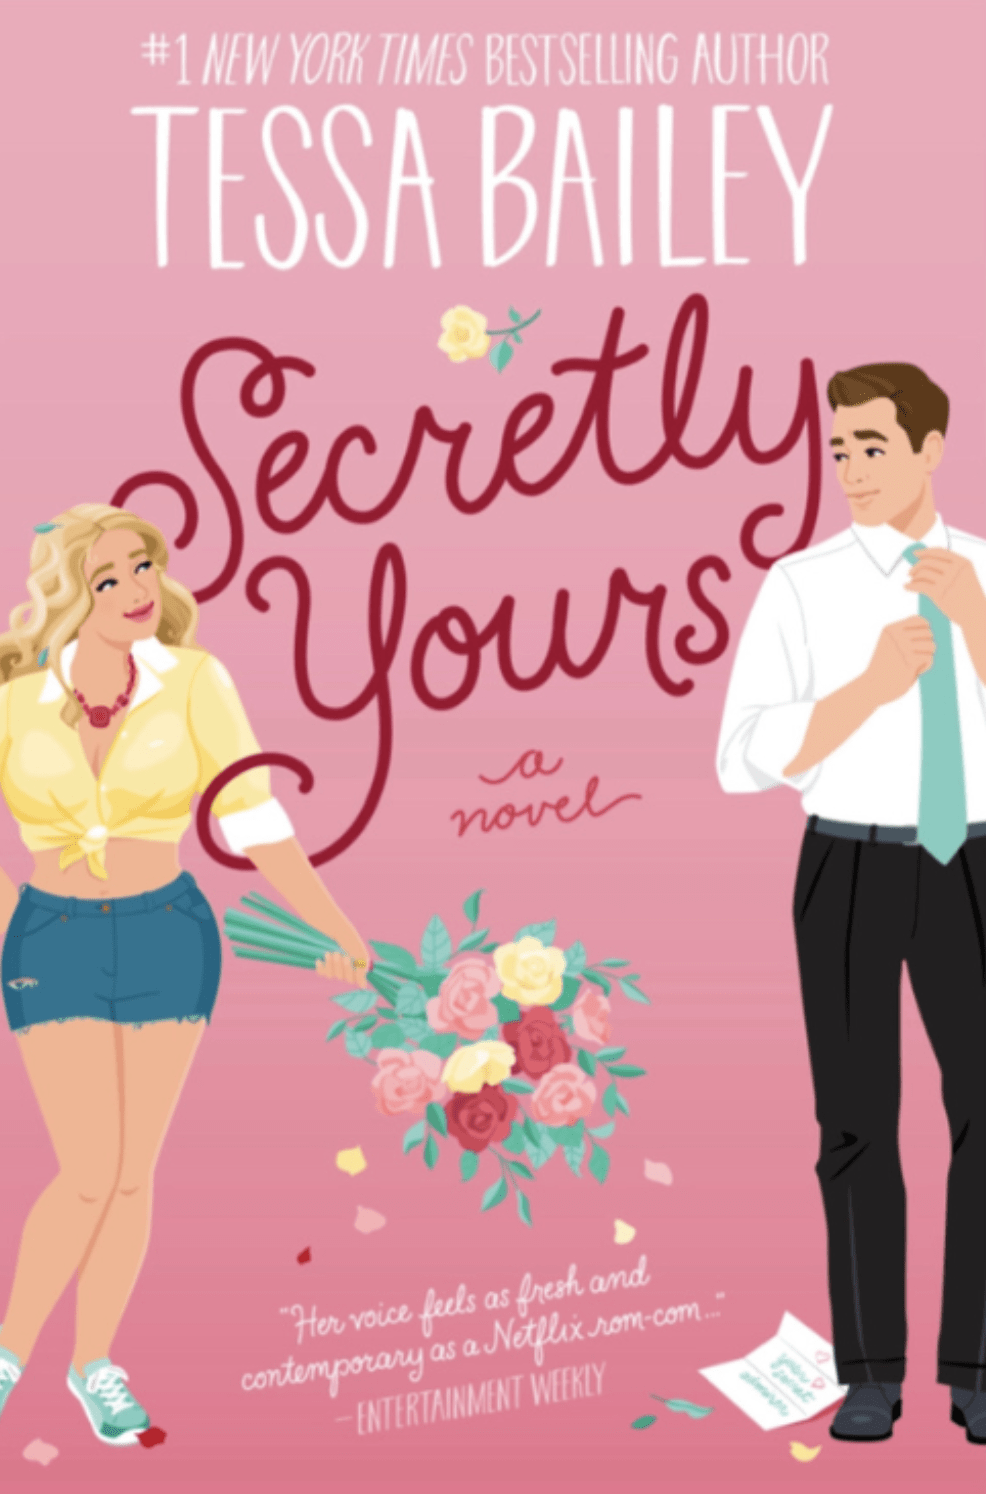 SECRETLY YOURS BY TESSA BAILEY